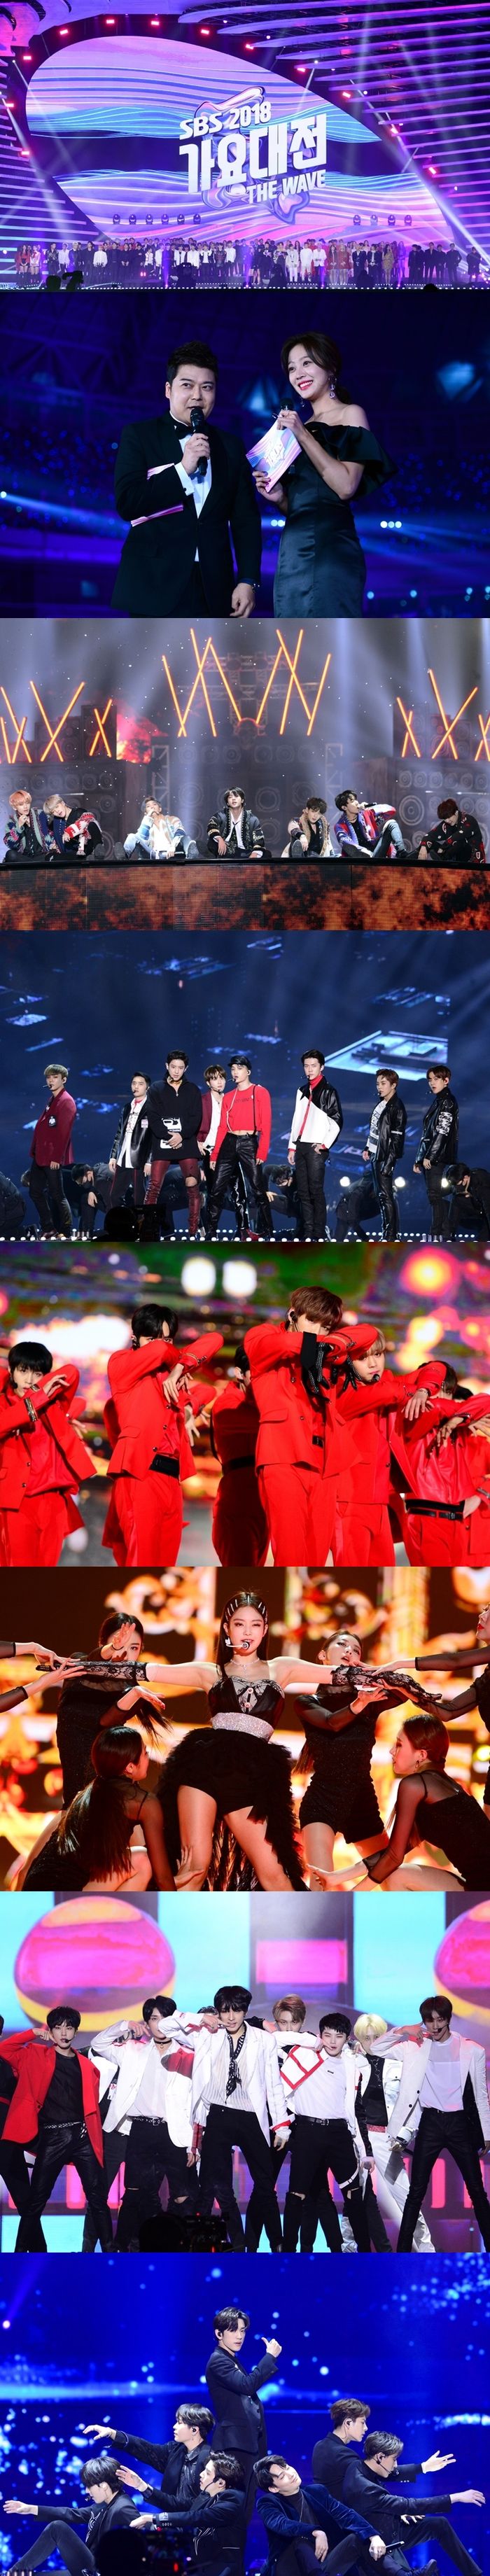 <p> Exo, BTS, Wanna One, such as the line-up for 2018 SBS The Great Warthis year for the gorgeous decor.</p><p>Last 25, from 5: 30 PM Seoul High flush Sky Dome in 210 minutes into the live broadcast in progress 2018 SBS The Great Waris the whole expression tree and care was conducted among, BTS, Exo, Wanna, One, with, Black Pink, Red Velvet, WINNER, Seventeen, BtoB, a-pink, stern, Monsta X, NCT, icon, Don, All, girlfriend, freshly seven, straight, more size, (girls)children, including 20 team for the fantastic stage.</p><p>Every year a new part of your attention to The Great Warthis year with the slogan the wave(THE WAVE). BTS as a singer of popular worldwide than ever before UP did one year was enough, the Korean crazeattention. The Great Waris the line-up with one of Past, Present, Future The Great War is limited to the special stage and this year the artist were more than one at a time and you can look at the colorful stage as viewers of the Christmas easy to make.</p><p>The Great Waris the first NEW WAVE section with the Straight, more than size, (girls)children, all brand such as this year hot sent of the arts of the stage as the start of the festival informed. Red Velvet, icons, screen, on the stage of the Senior Idol their hit cover on stage. NEWTRO WAVEin red velvet and trees and is in collaboration with S. E. S. Dreams come true, Monsta X, Seventeen, Wanna One is 2PMs Again & Again covers The Great War Limited Edition stage as a new stage is plotted.</p><p>Also, your girlfriend Summer summerwinteron the dog for a winter stage decorated. Exos Baek Hyun, Chen, Chan Yeol, Dio Grand piano set the stage in a white suit, dressed as for 12 miracle of thecalled end of the year mood in me.</p><p>The Great WarPart 1 endings in hip-hop as finishing. LEGENDARY WAVEby Korean hip-hop of aid, Tiger JK, Yoon So, video is part 1 endings. Following the colossal wooden doors, screen, show, girlfriend, galaxies, and the implementation of the Big Bang floral escape covers the stage 2 part of the start informed.</p><p> The GLOBAL WAVE section in the freshly seven JB, Wanna One Kim Jae-Hwan, WINNER Kang Seung-Yoon, NCT degrees, Seventeen degrees brunch group, including representatives of the vocals as they had appeared. These are the movie through the generations for the popularity of Queens DONt STOP ME NOWand enter this compelling stage directing for himself not only as.</p><p>Meanwhile, this day viewership 9. 4%(Nielsen Korea, aggregate basis)to the best 1 minuteheroine The Great Warat Solo new song starting point which is the first public WINNER Song Min Ho. Gorgeous yellow outfit and such a unique charisma, music for Song Min Hos gaze caught and followed by the solo song Anak Indonesia. The WINNER members and the line push the seriesatmosphere to me.</p><p>The first public of this as well. Seventeen Japan debut title song CALL CALL CALL!A Korean version of The Great Warfor the first time in public by fans of the attention focused.</p><p>This year the best year sent a global star, the BTS of the stage. The world fascinated BTS is The Great Warfrom the 6 songs of the hit songs they have and proved popular. BTS is the day the debut song No more Dream, starting with the man, rain, fire I, DNA, idol such a splendid performance as the concert with that stage.</p><p>This day The Great Warof the ending X address. Exo Love Shotand Tempoand relatives dome open top with lead. Exo motorcycle to use the stage design, fashionable performance, up to perfect finish 2018 SBS The Great War.</p><p>What, according to the 2018 SBS The Great Waris 2049 viewership 5. 1%to receive this broadcast terrestrial, do not copy any channel of the program throughout the viewership # 1 and topic demonstrated. Furniture viewership is 7. 4%, the top 9. 4%(NCR, Part 2 Standard)up to soared.</p><p>Meanwhile, this year The Great WarFestival of because the SBS is the 28th(Friday) celebrity target, 31(November) smoke weed everydayby 2018, the viewers of the much-loved SBS programs and drama to revisit, and one year to mopping.</p>